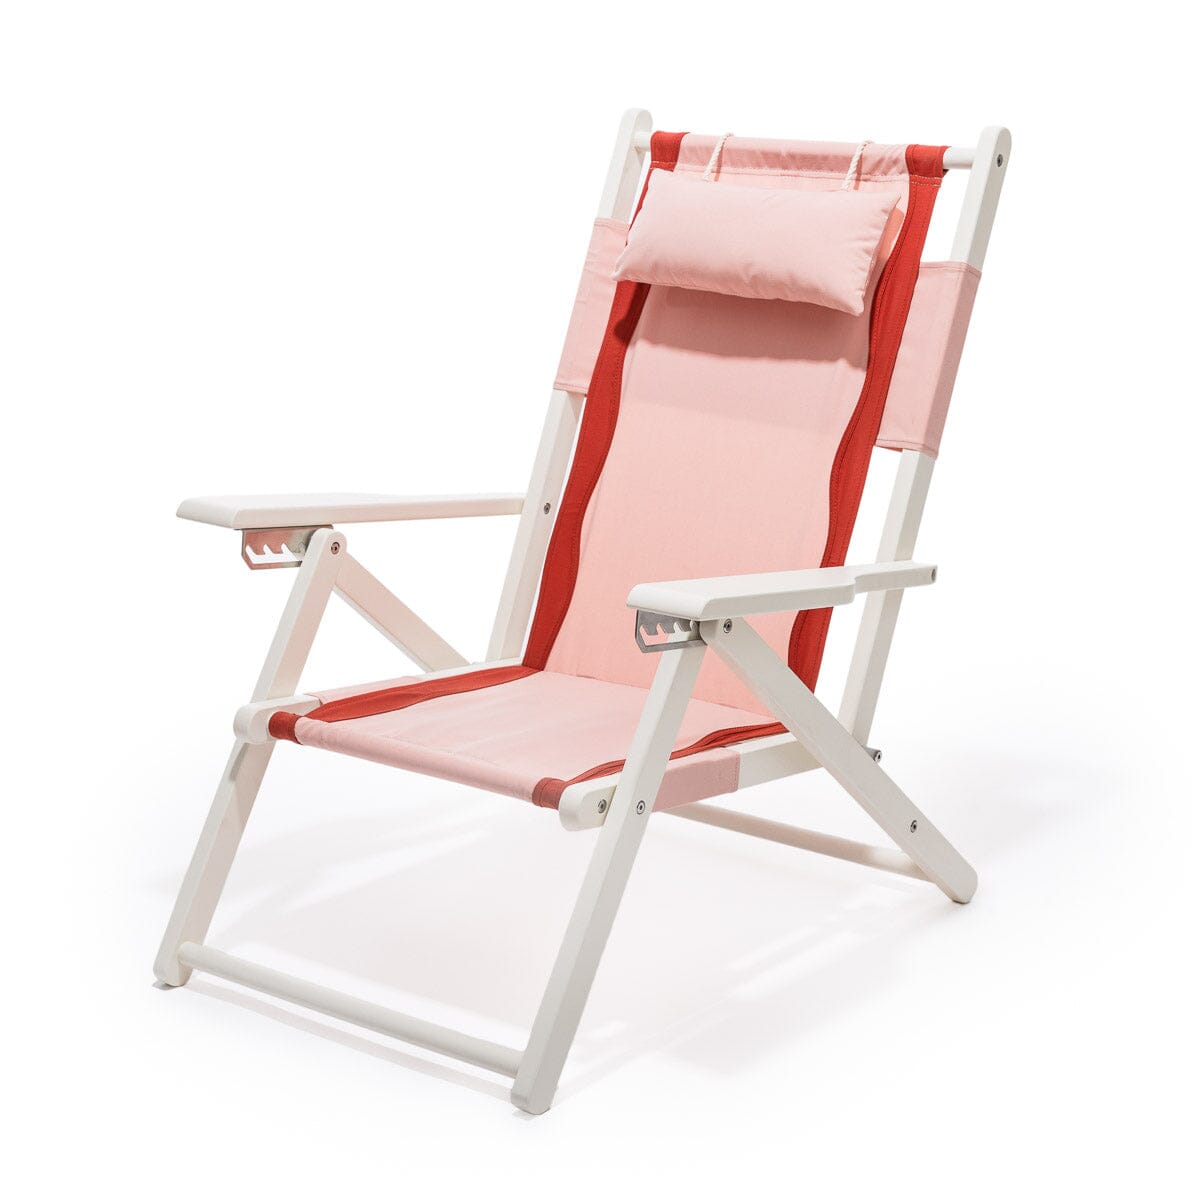 The Tommy Chair - Rivie Pink Tommy Chair Business & Pleasure Co Aus 